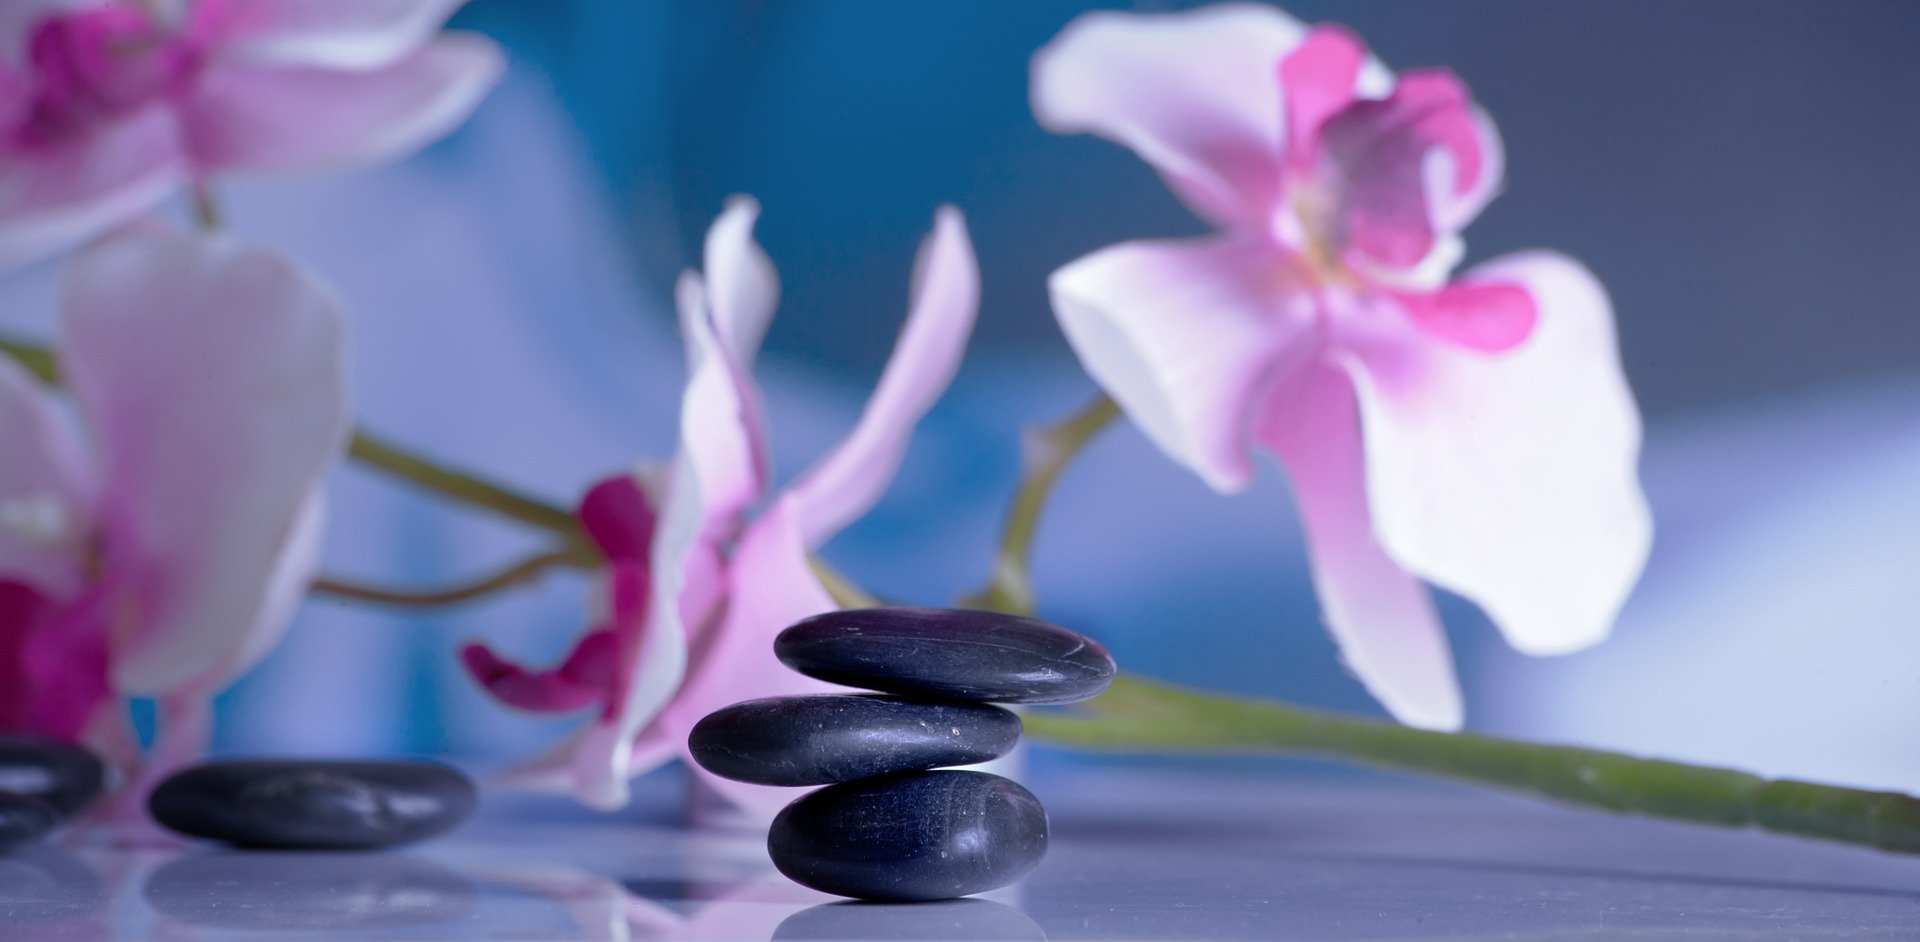 Thai Massage in Petaluma California - Hot Stone Massage is just one type of luxurious massage you can receive at Blue Orchid Massage